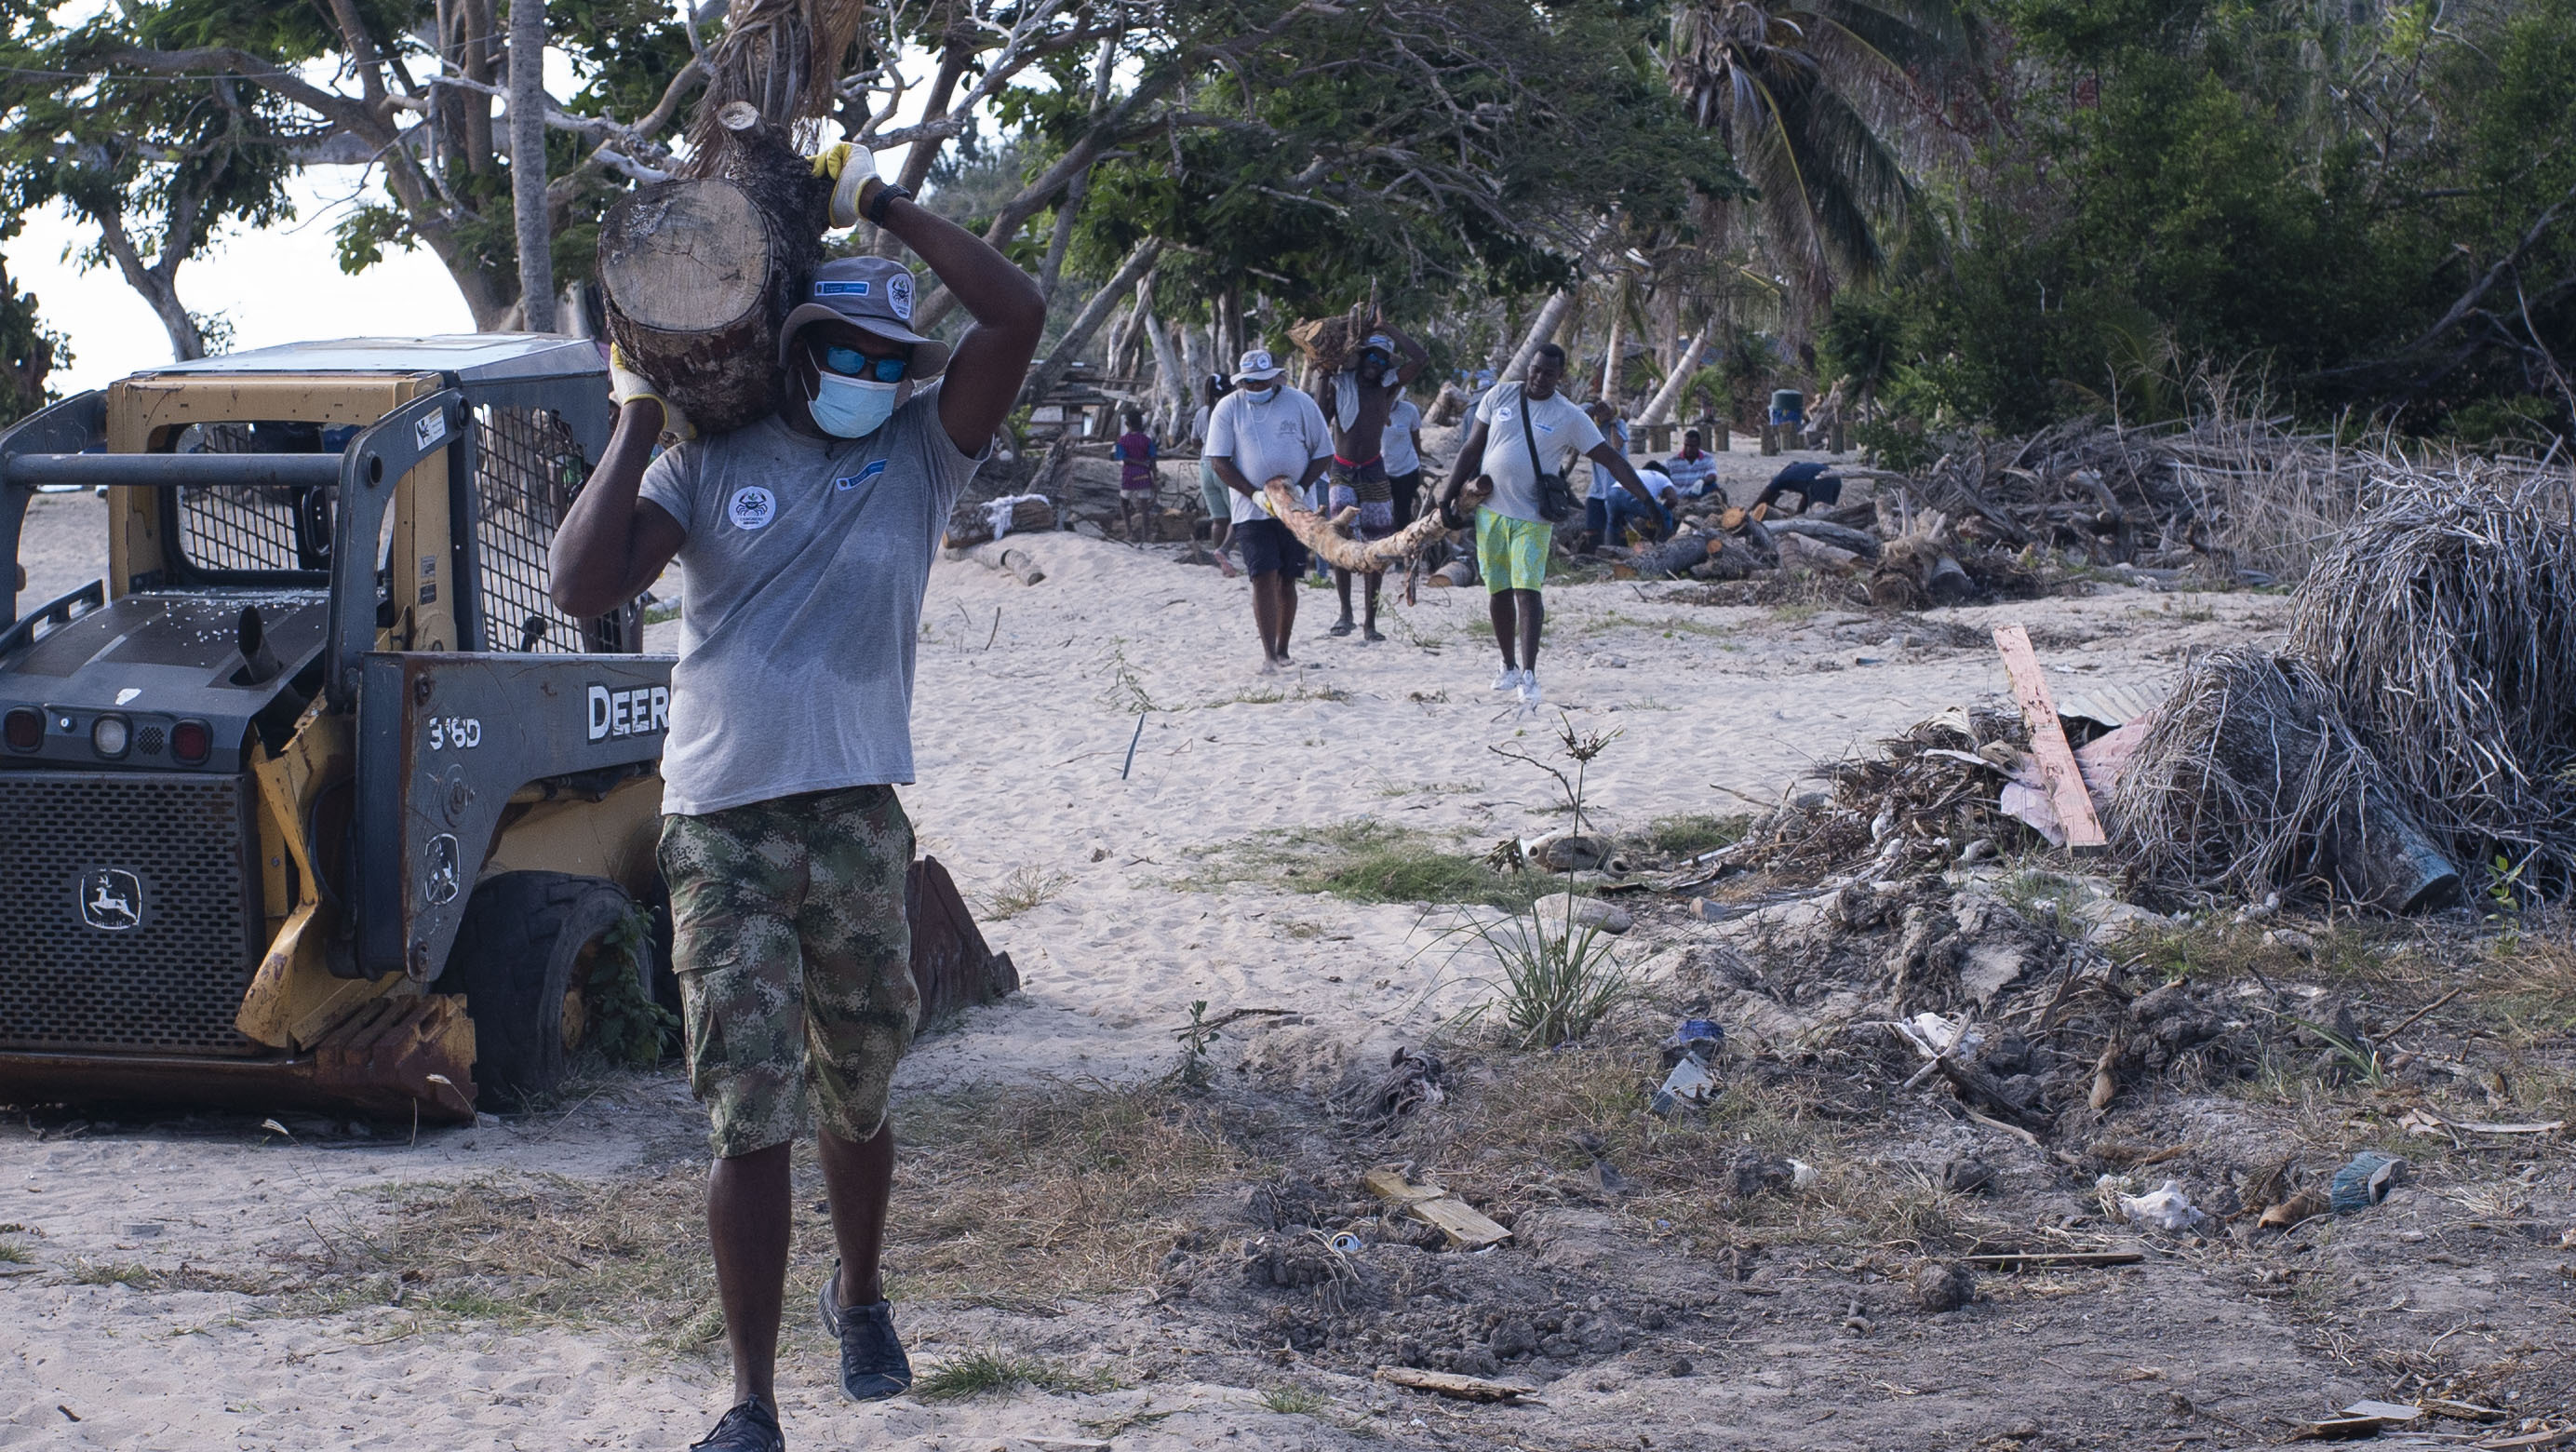 Clearing up debris after the damage caused by a hurricane affecting Colombia’s coastal communities.